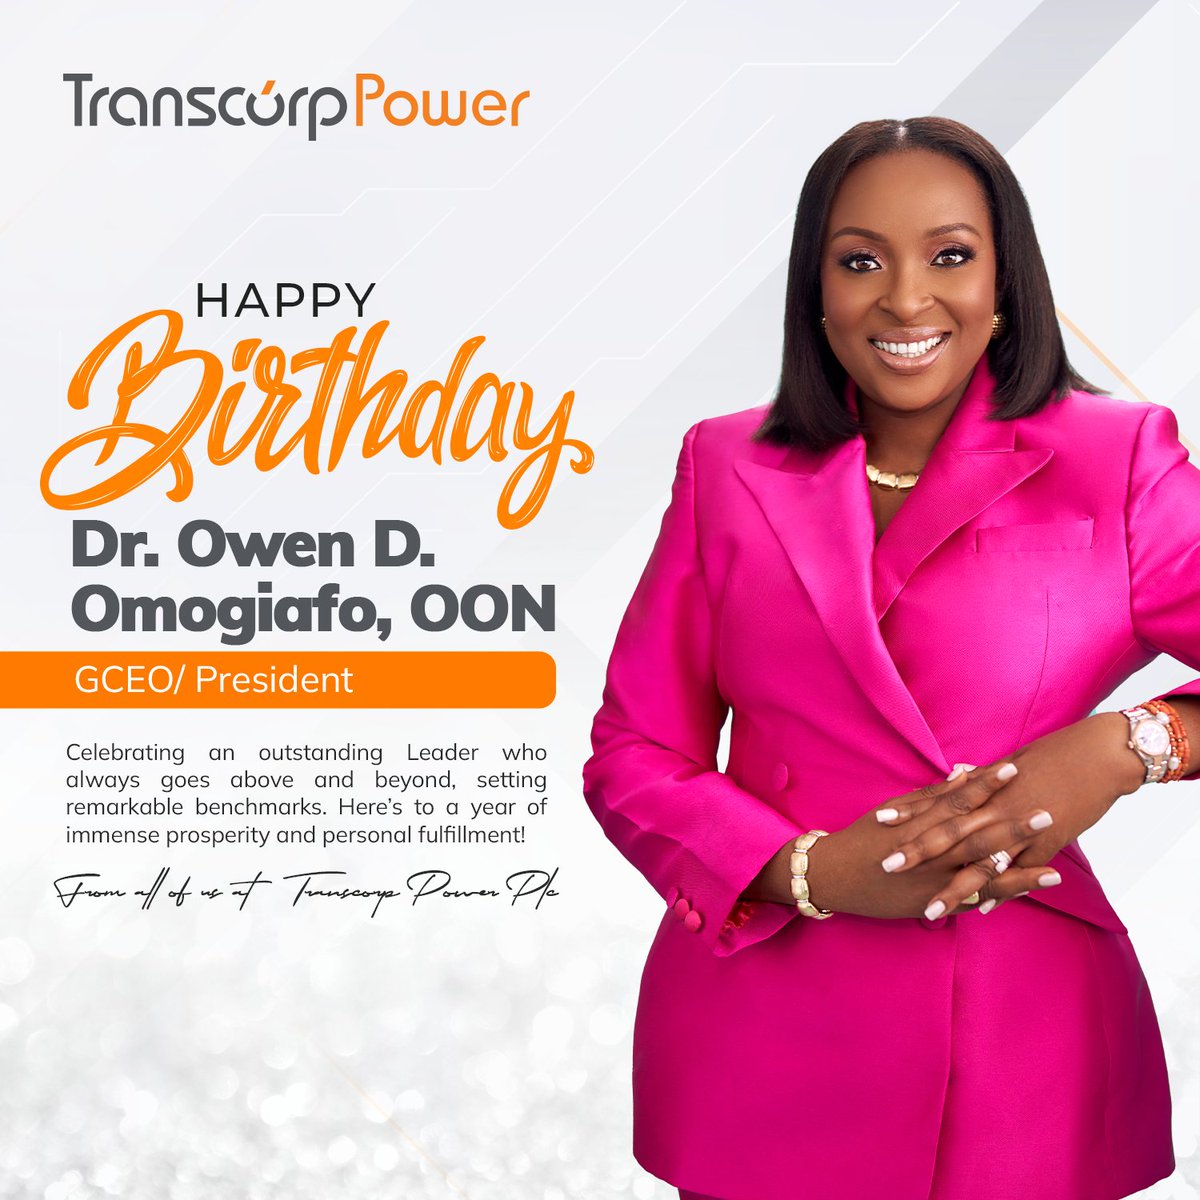 Happy birthday to our President/Group CEO, Owen Omogiafo, a remarkable leader!

Thank you for your excellent leadership. Here’s to many more years of greatness
#Transcorppower